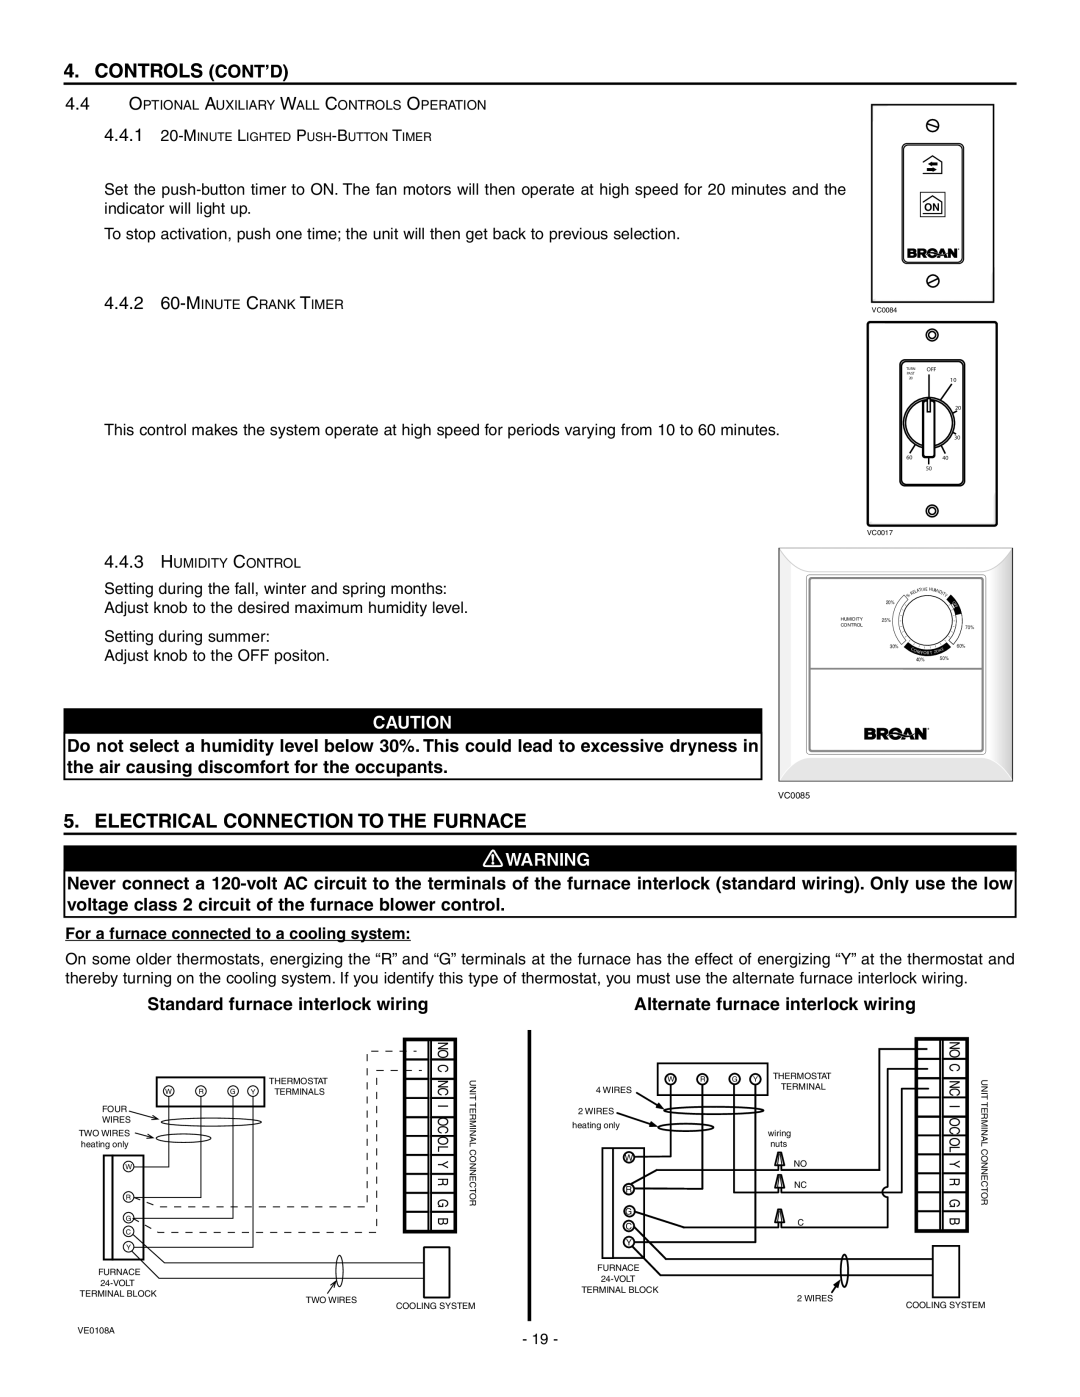 Broan HRV90HT Controls Cont’D, Electrical Connection To The Furnace, 0! WARNING, Standard furnace interlock wiring 